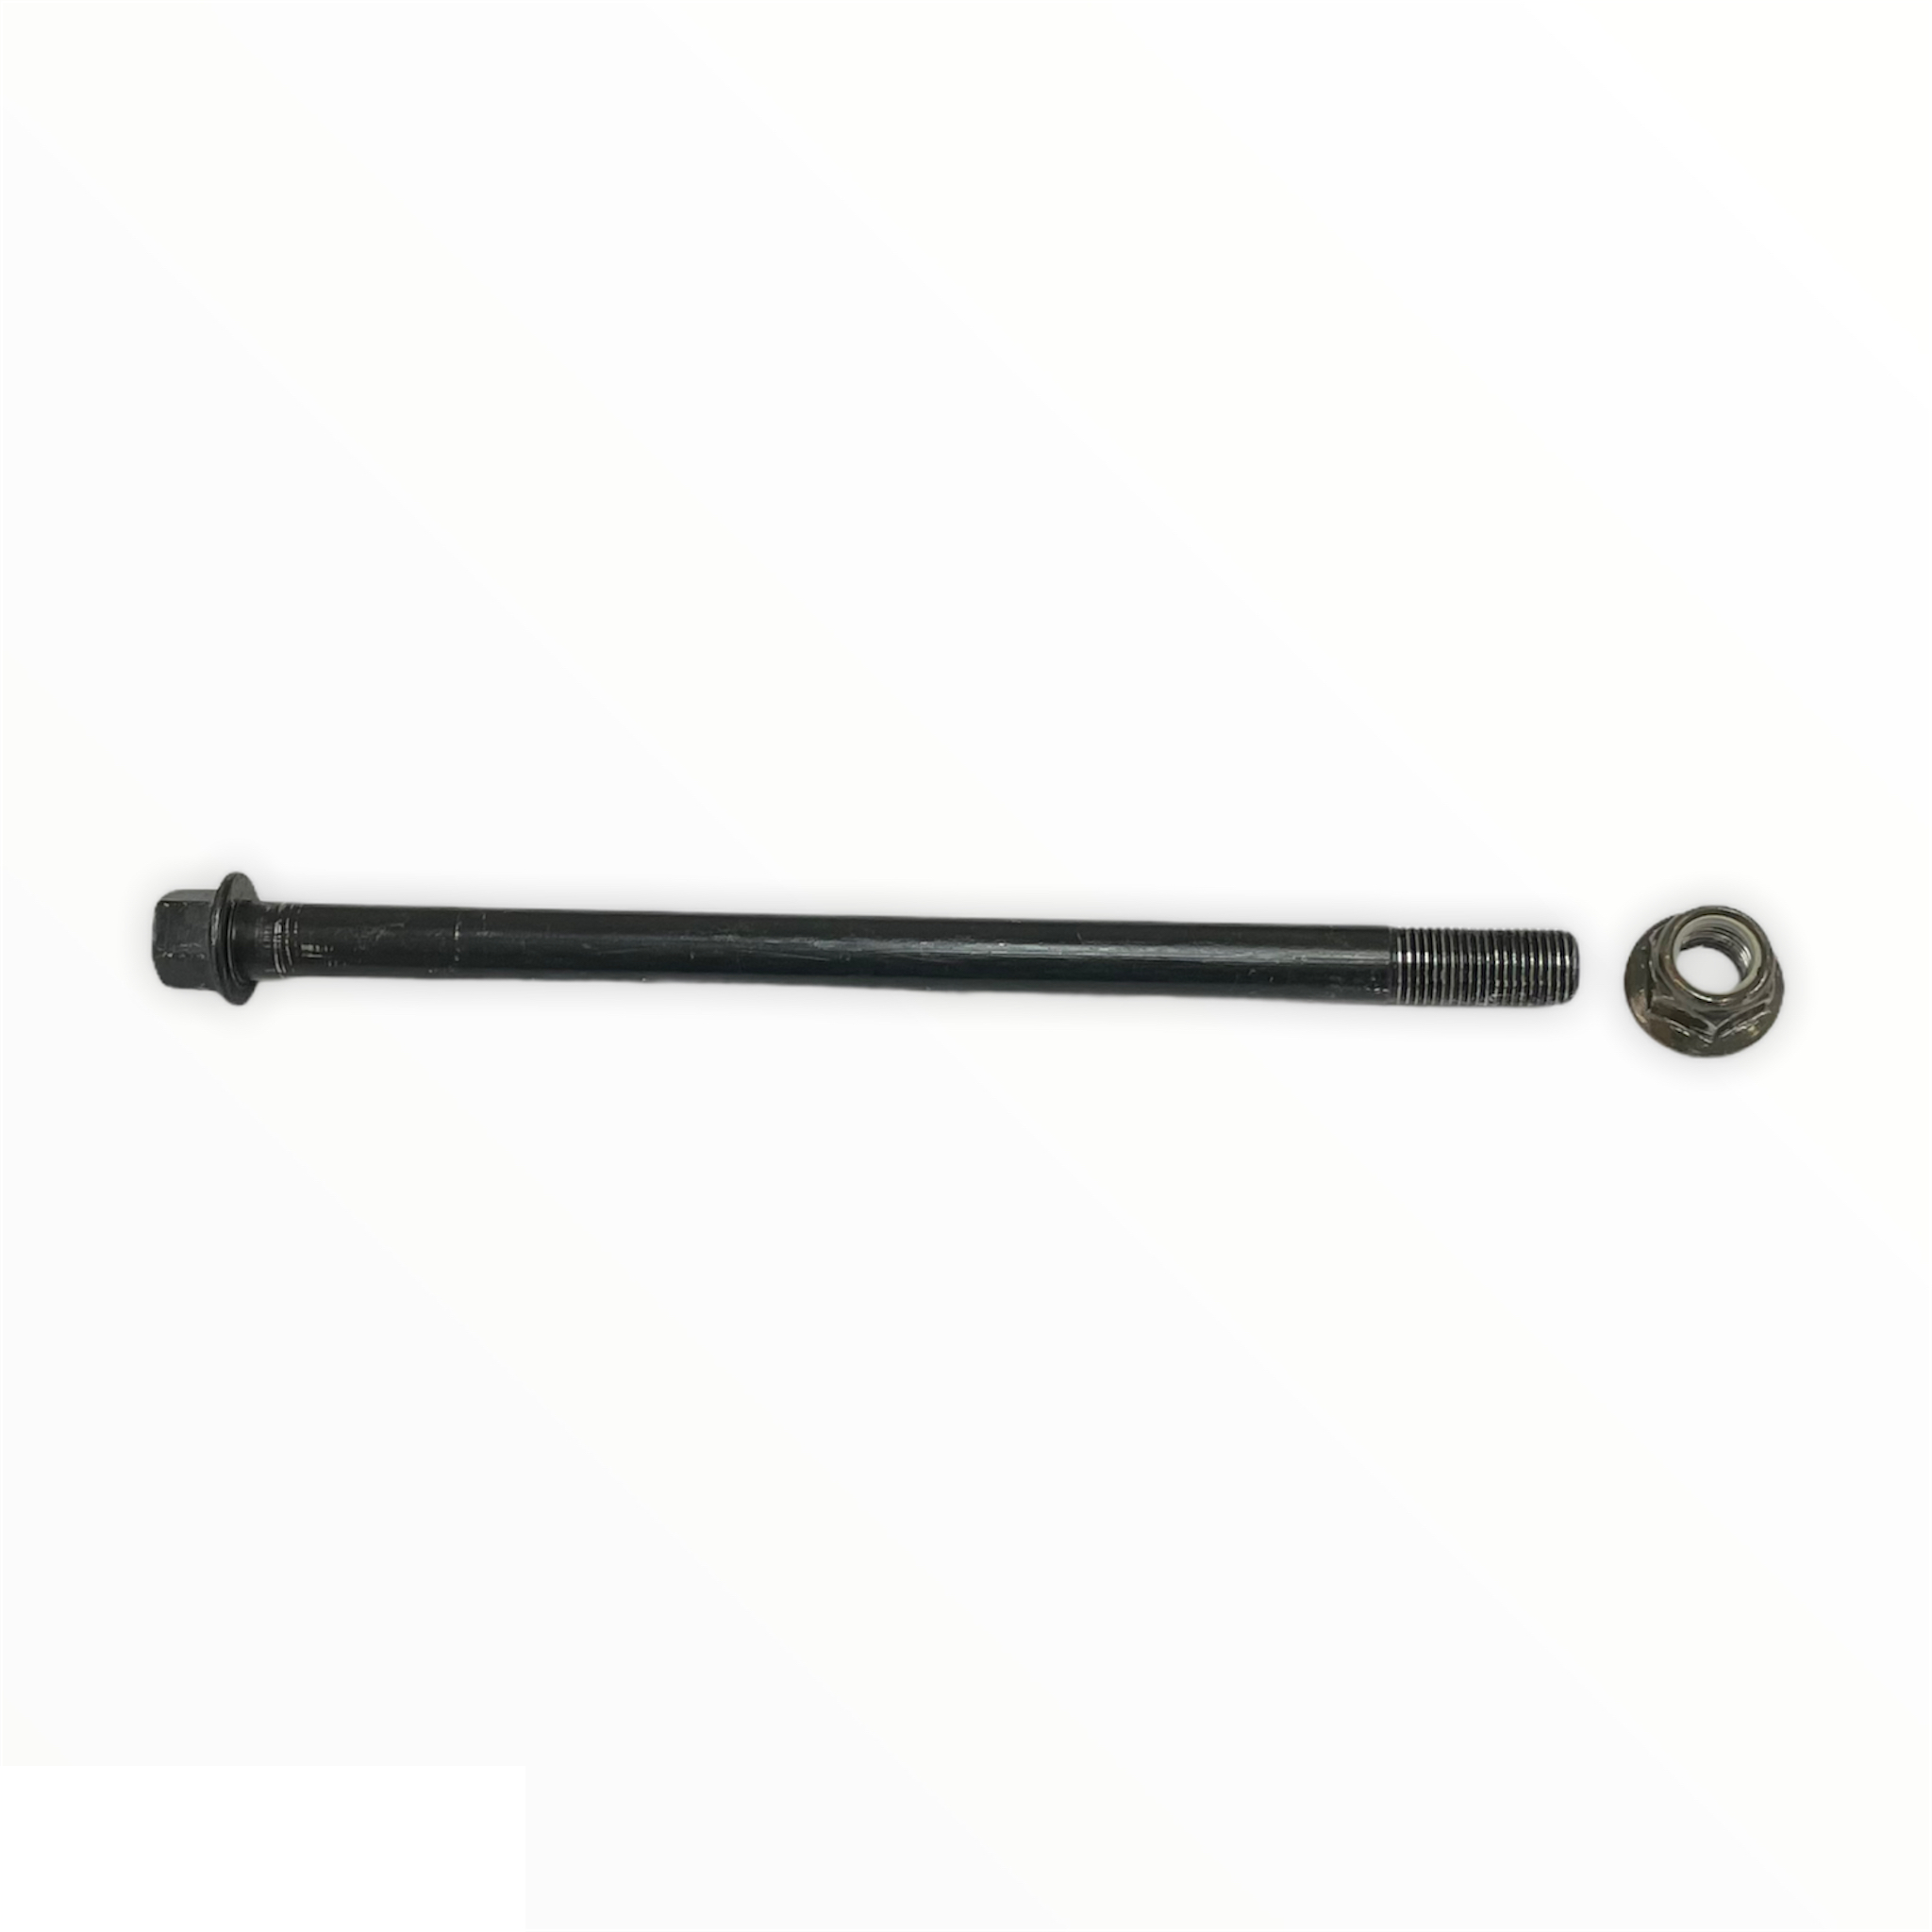 MIDDLE AXEL M14(195X12MM)